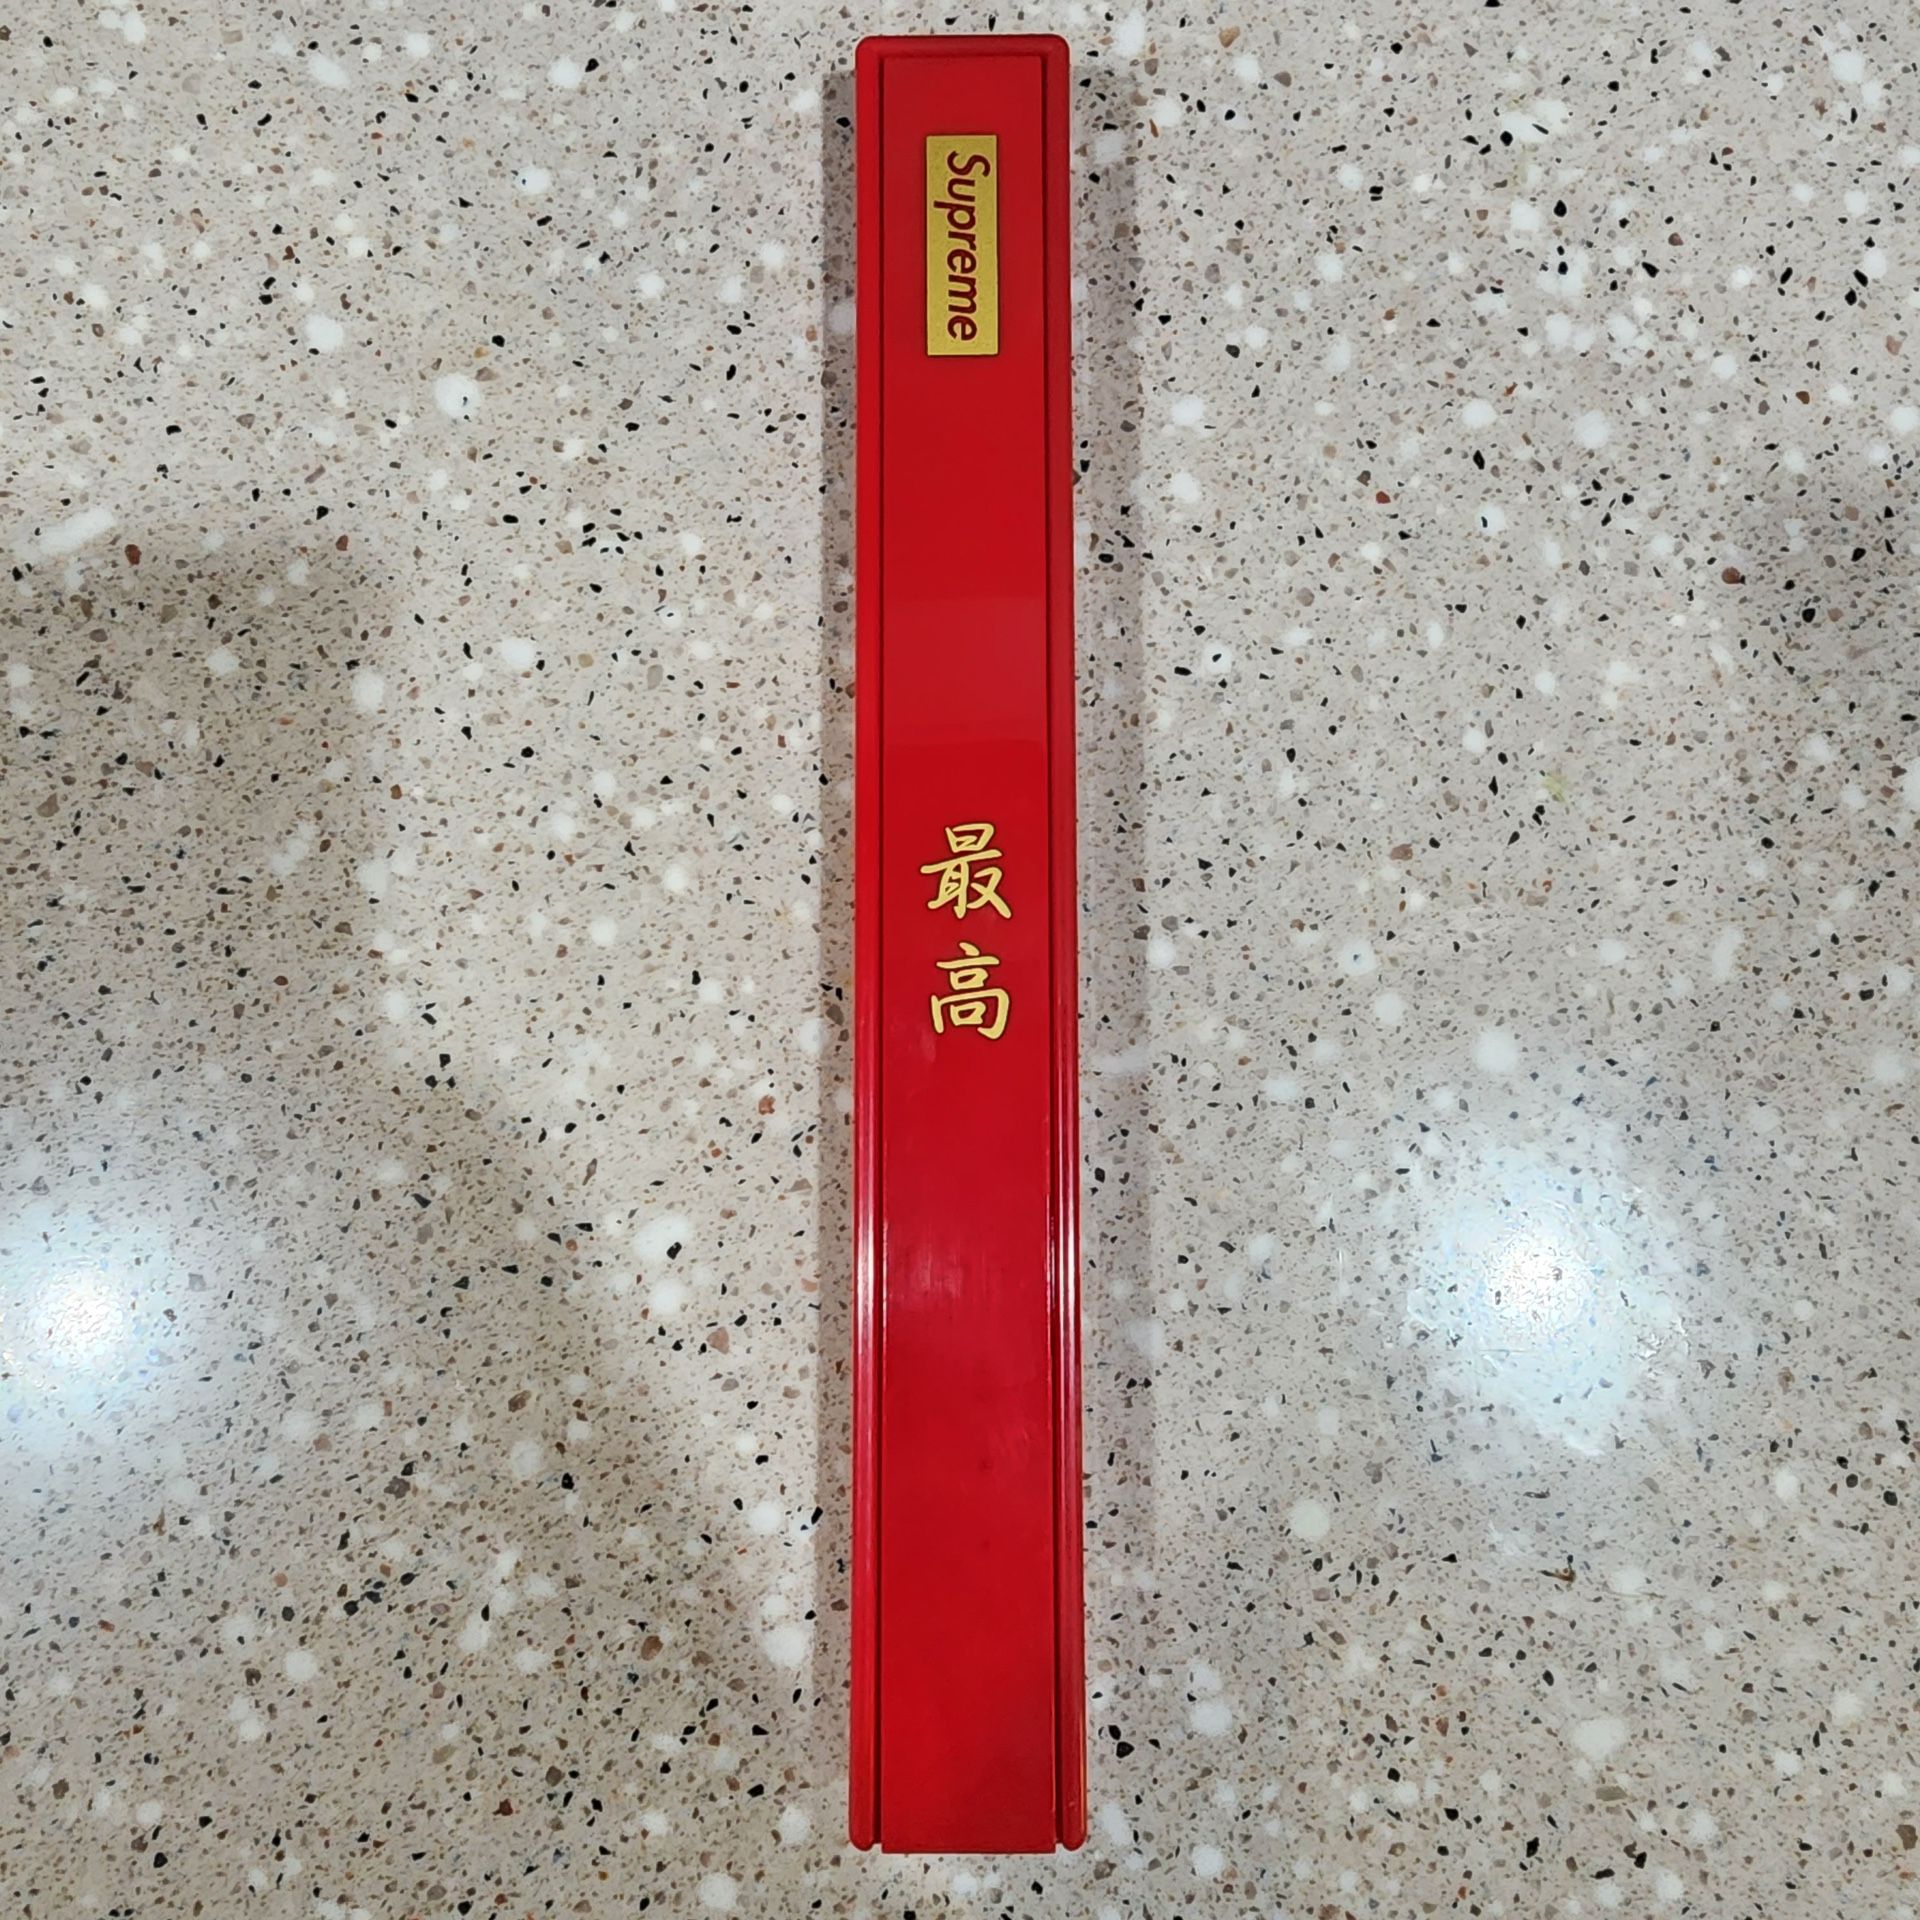 Supreme - Chopsticks (FW17) - Red - New for Sale in Anaheim, CA